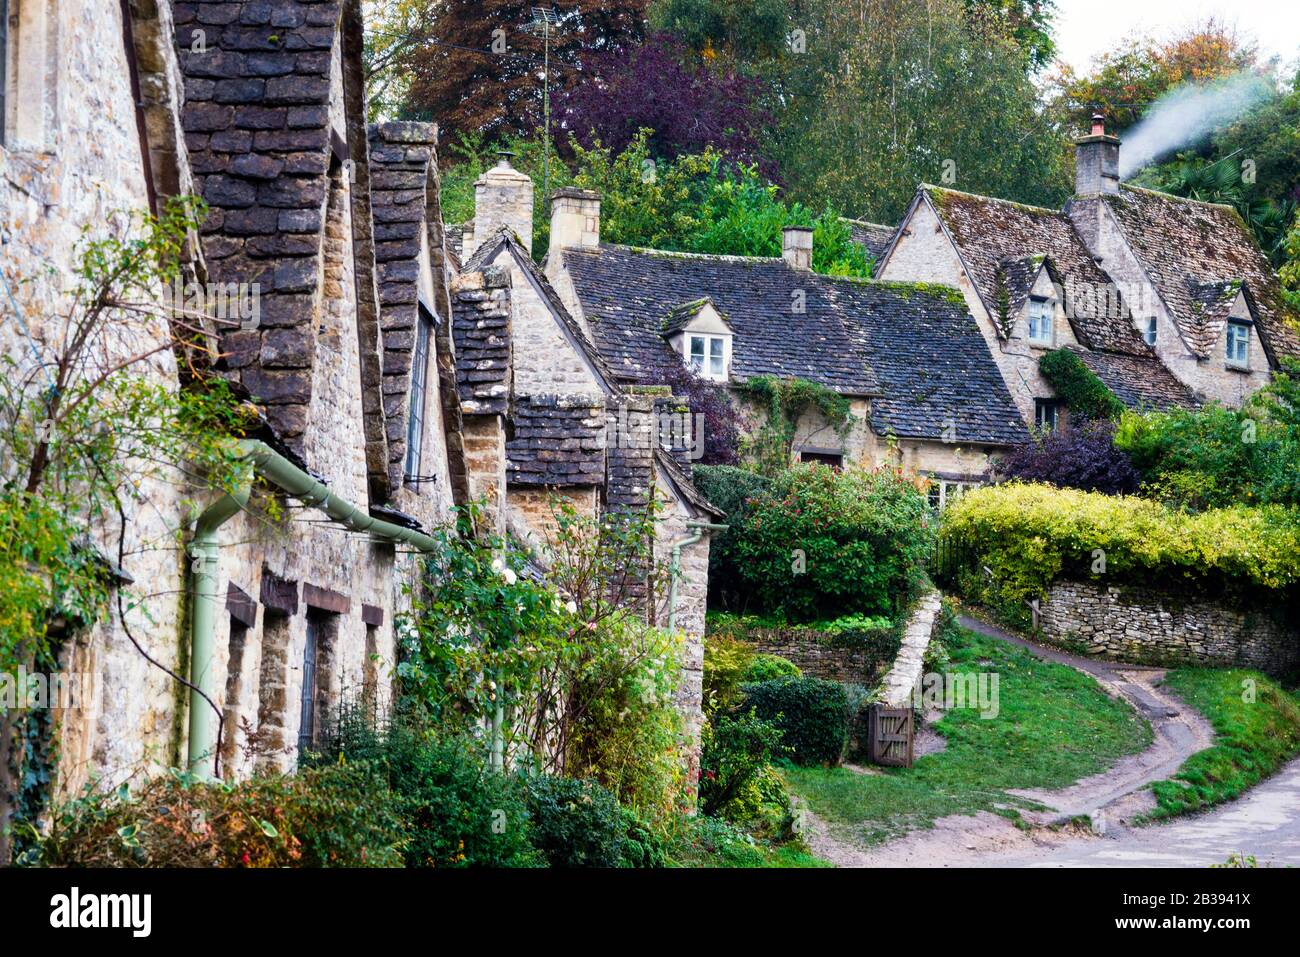 Arlington Row in Bibury is depicted on the inside cover of all British passports, the Cotswolds, England. Stock Photo